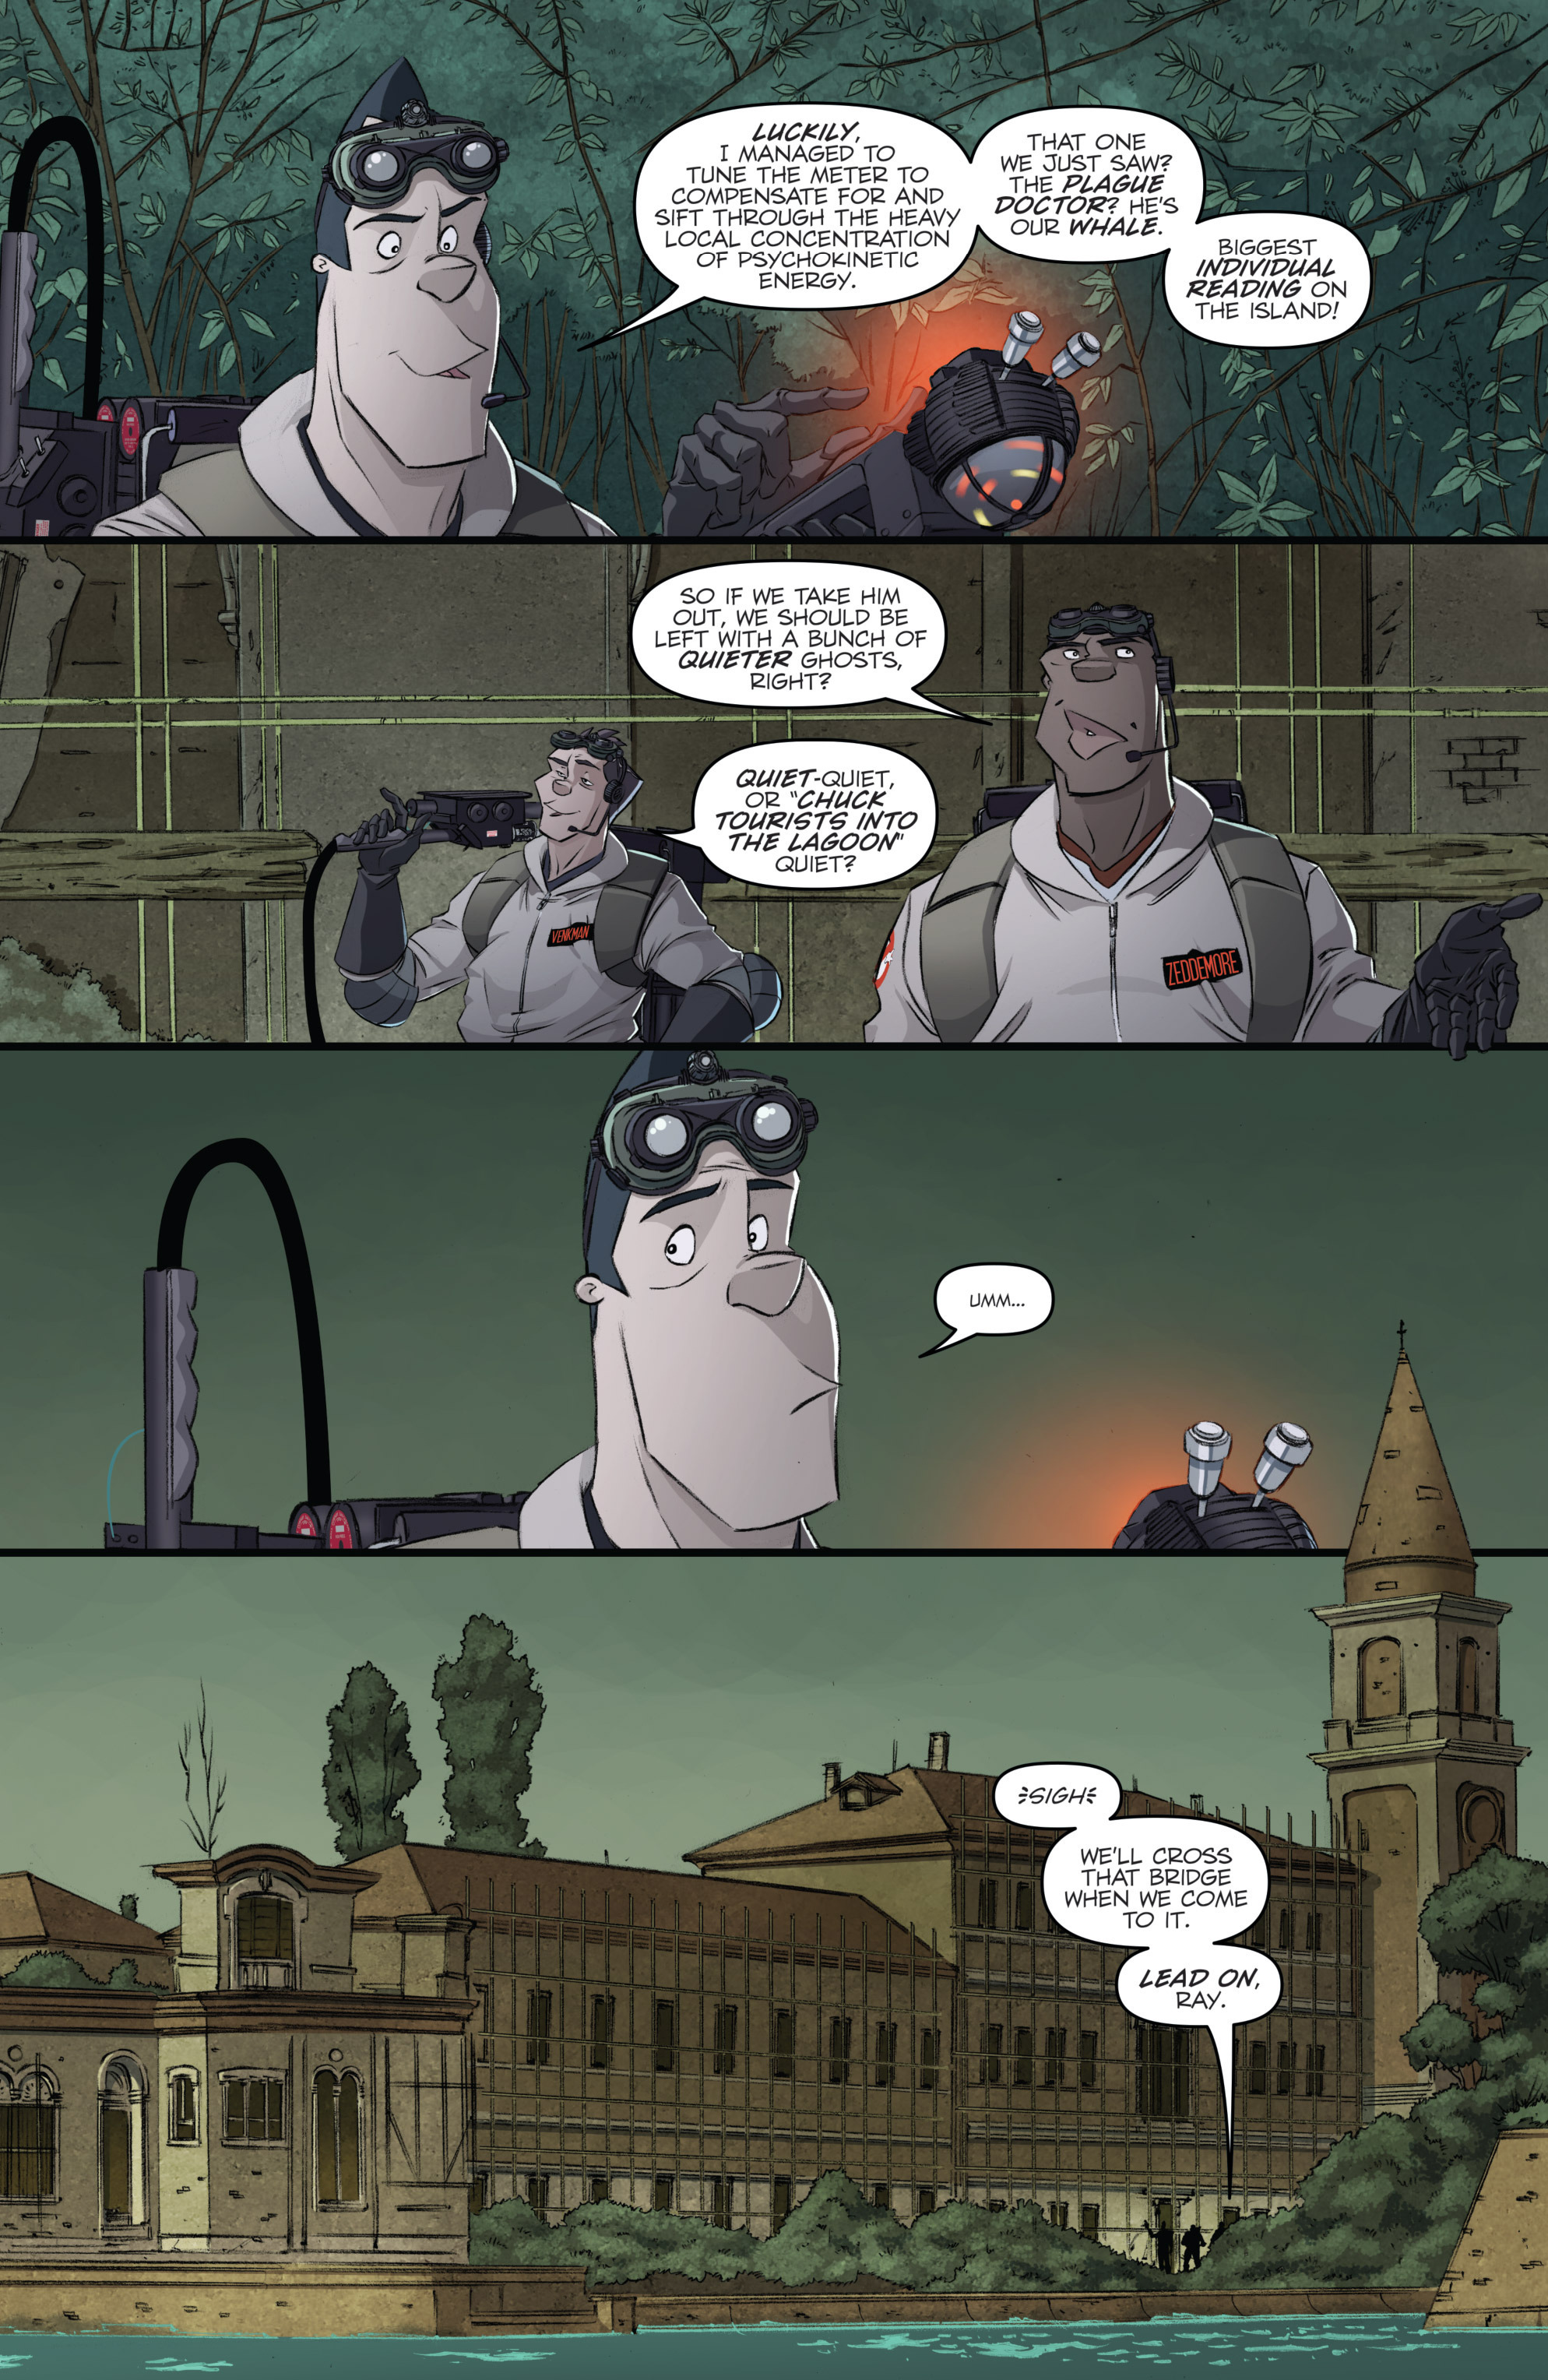 Read online Ghostbusters: International comic -  Issue #3 - 9